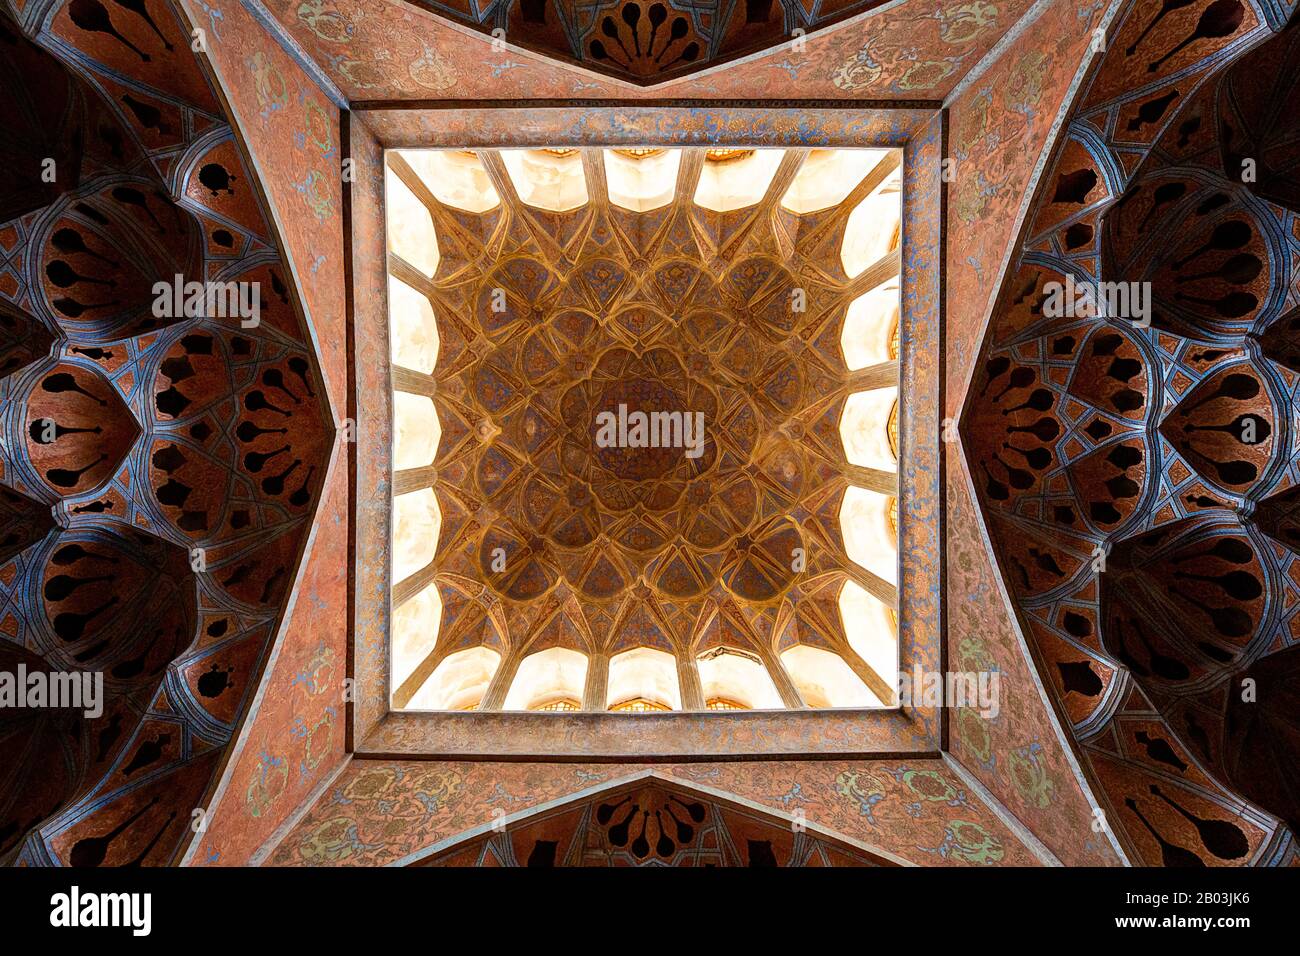 Ceiling of the music room in Ali Qapu palace, located at Naqsh-e Jahan, Imam Square, Isfahan, Iran Stock Photo